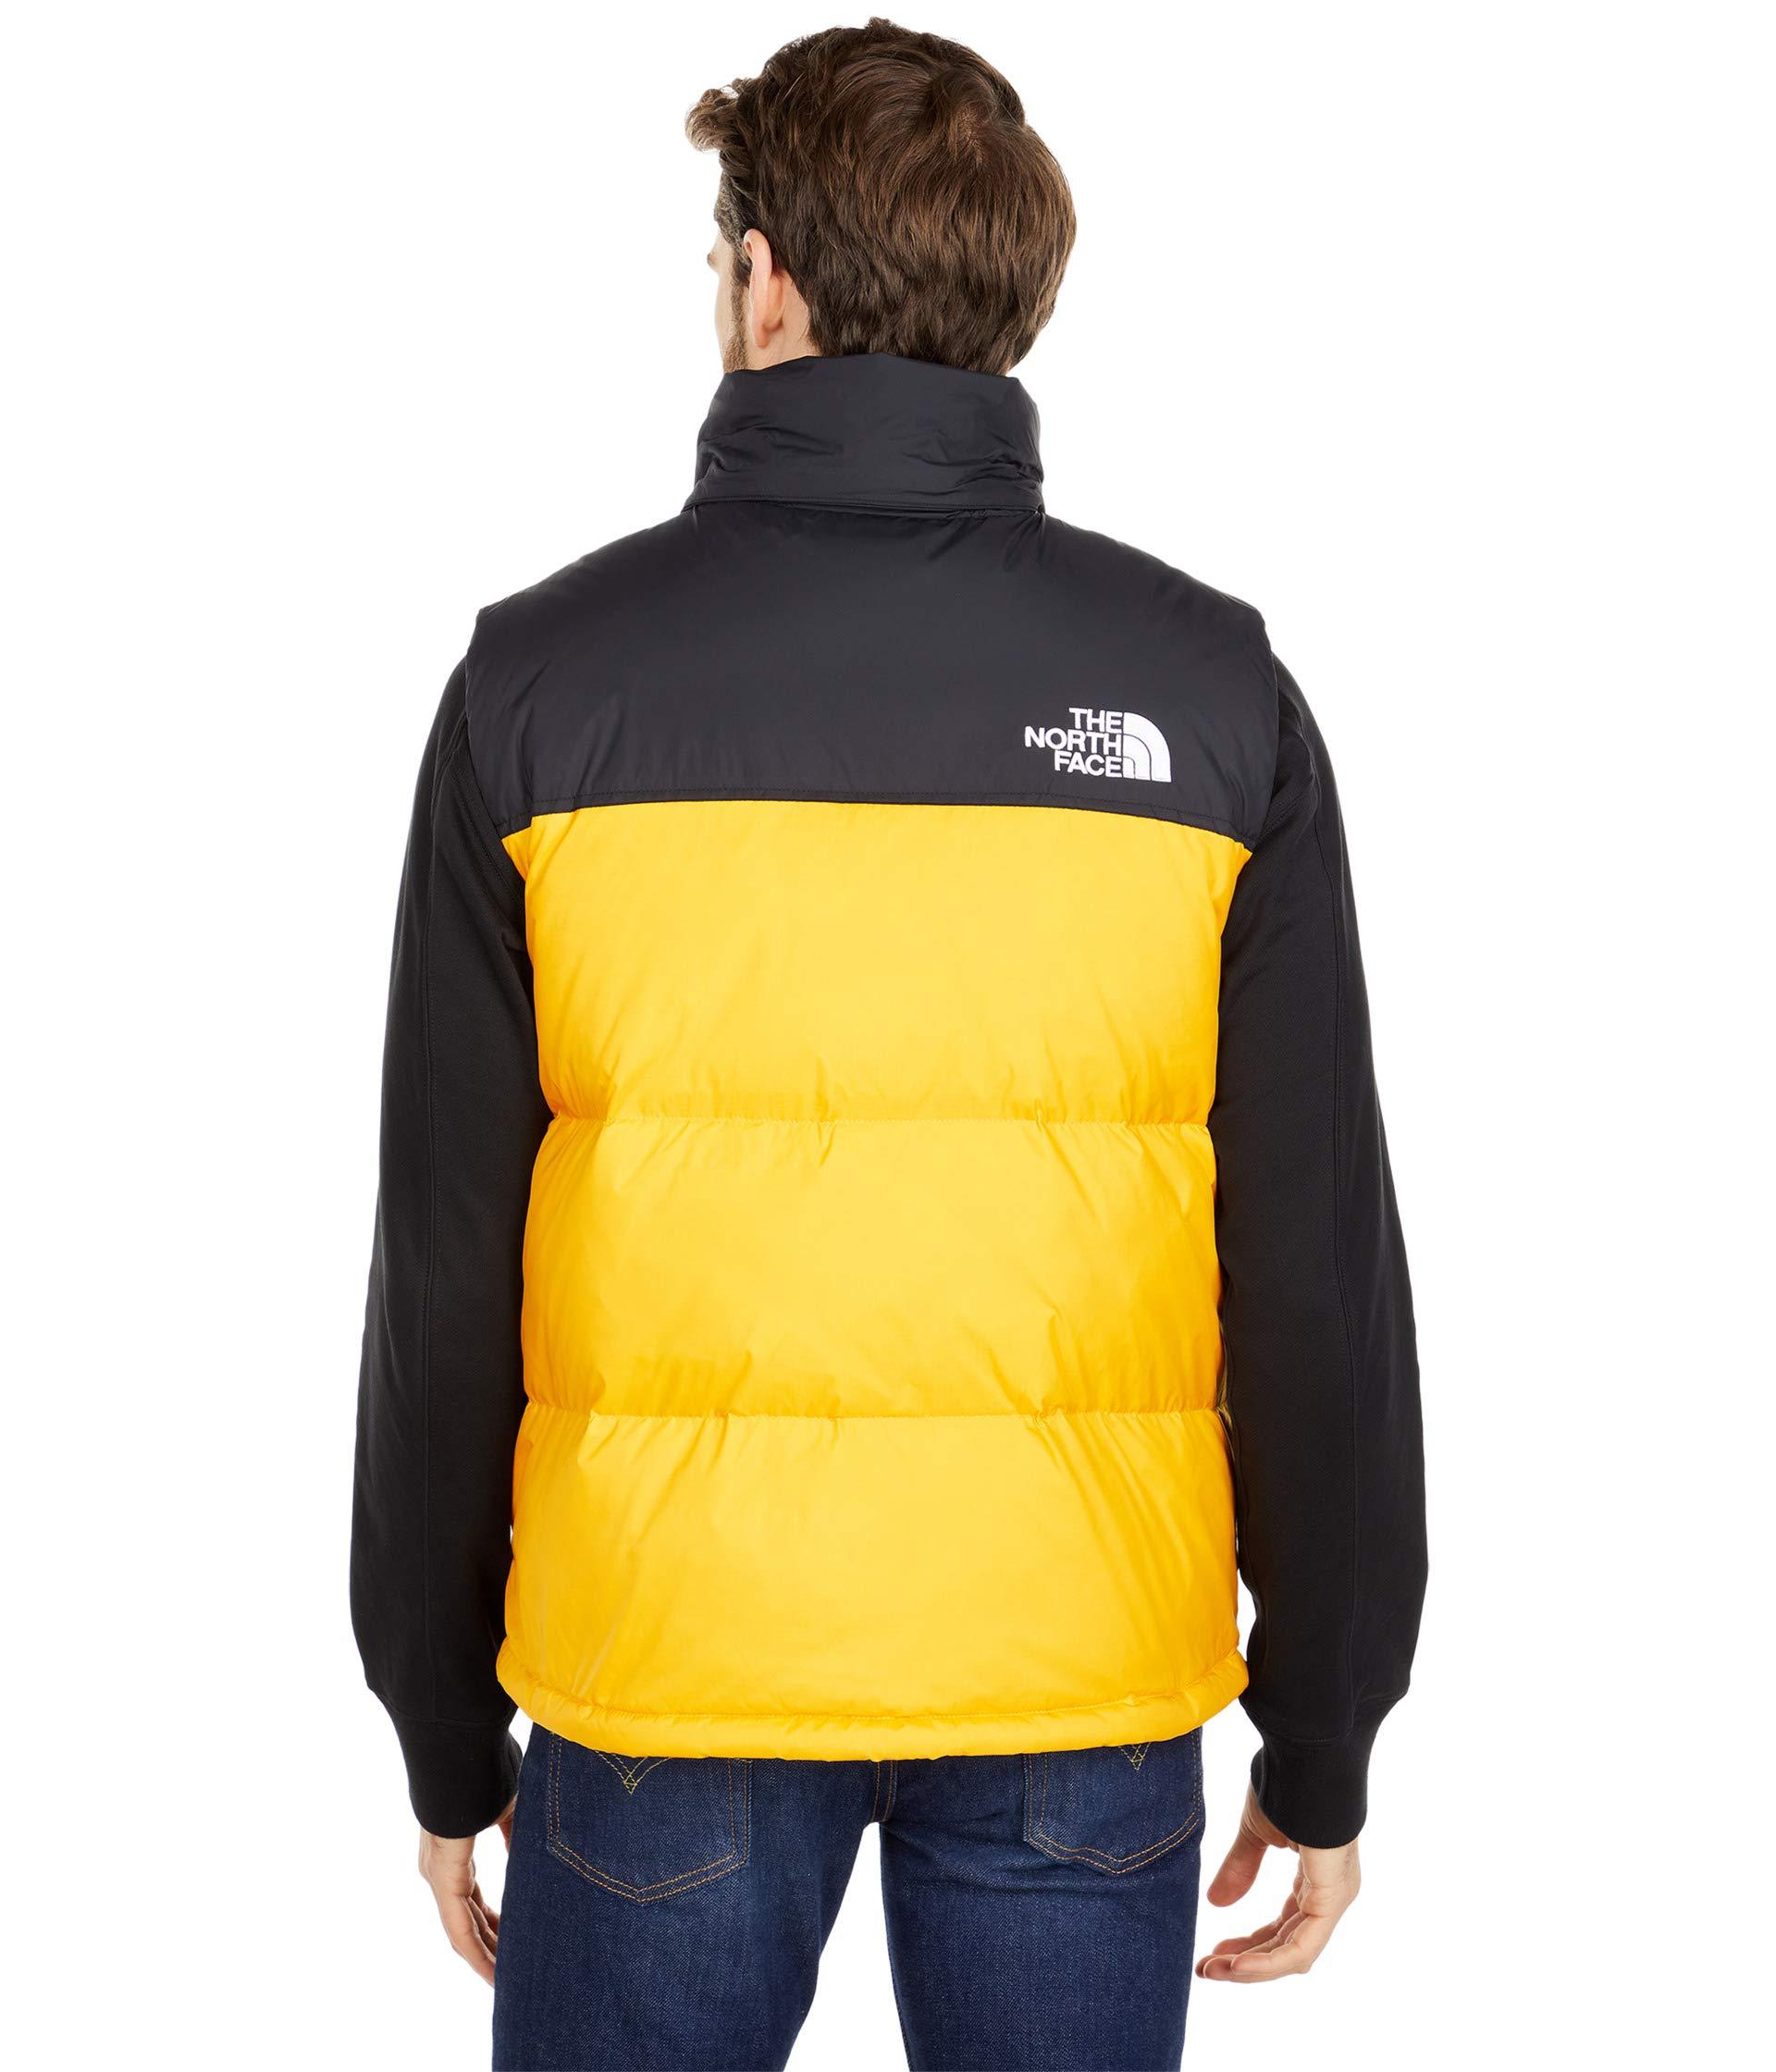 yellow north face vest